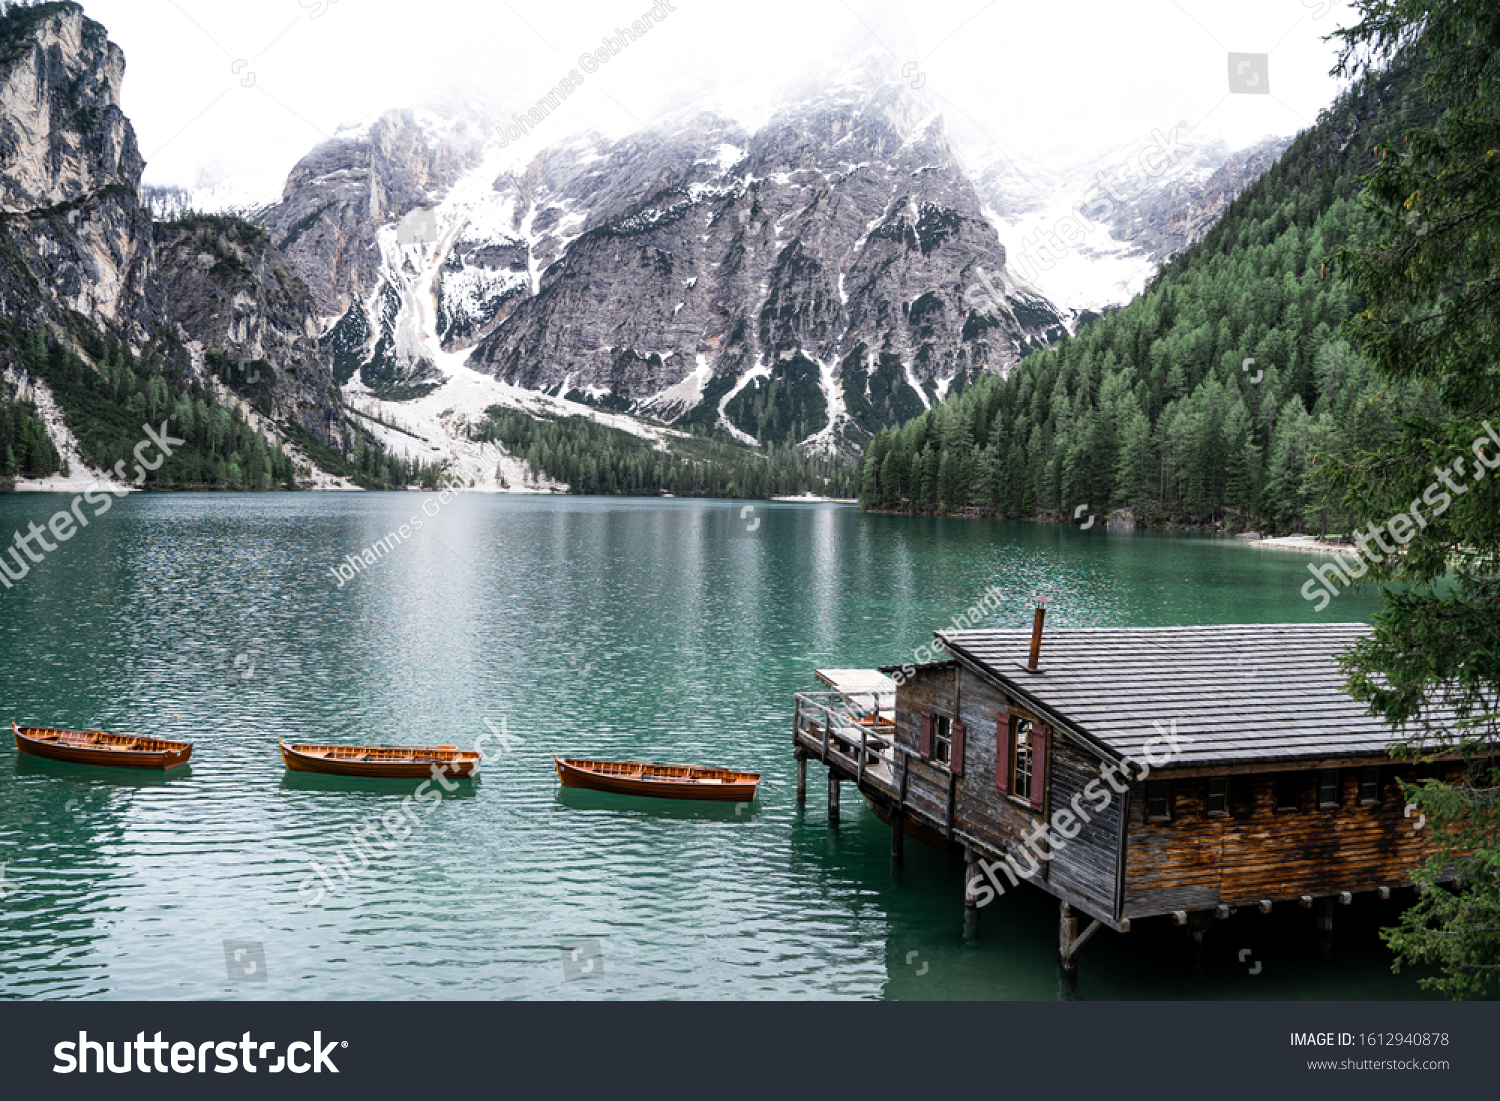 Beautiful Lago di Braies in South Tyrol, Italy with it's famous wooden boats an turquoise water #1612940878